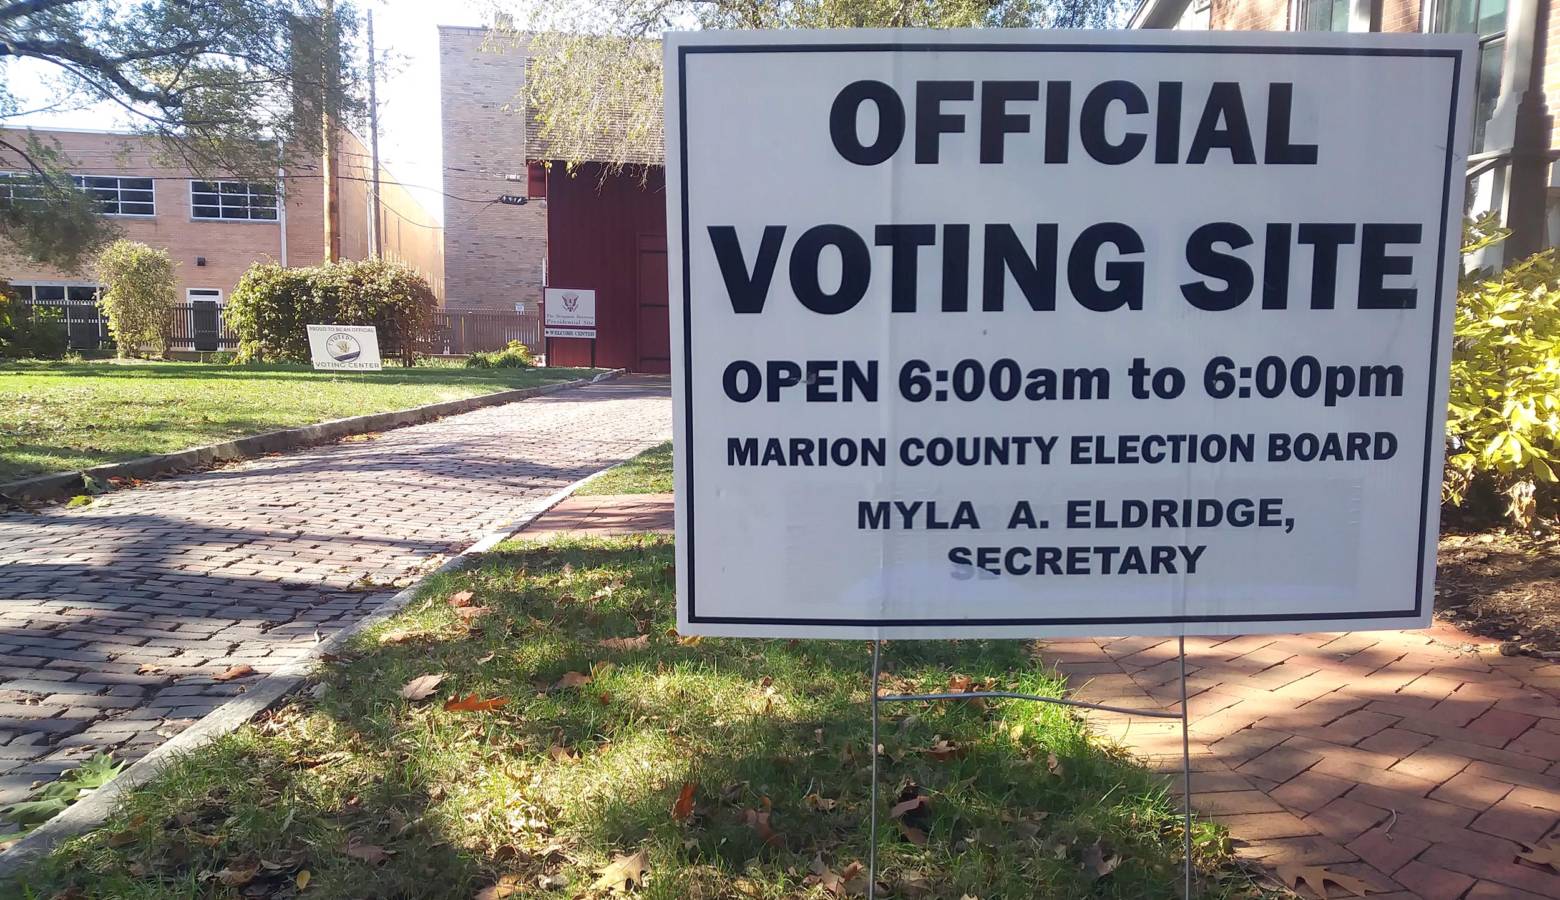 Two school funding referendum measures were proposed in Marion County. Center Grove failed to gain voter approval, but MSD Lawrence Township did. (Lauren Chapman/IPB News)